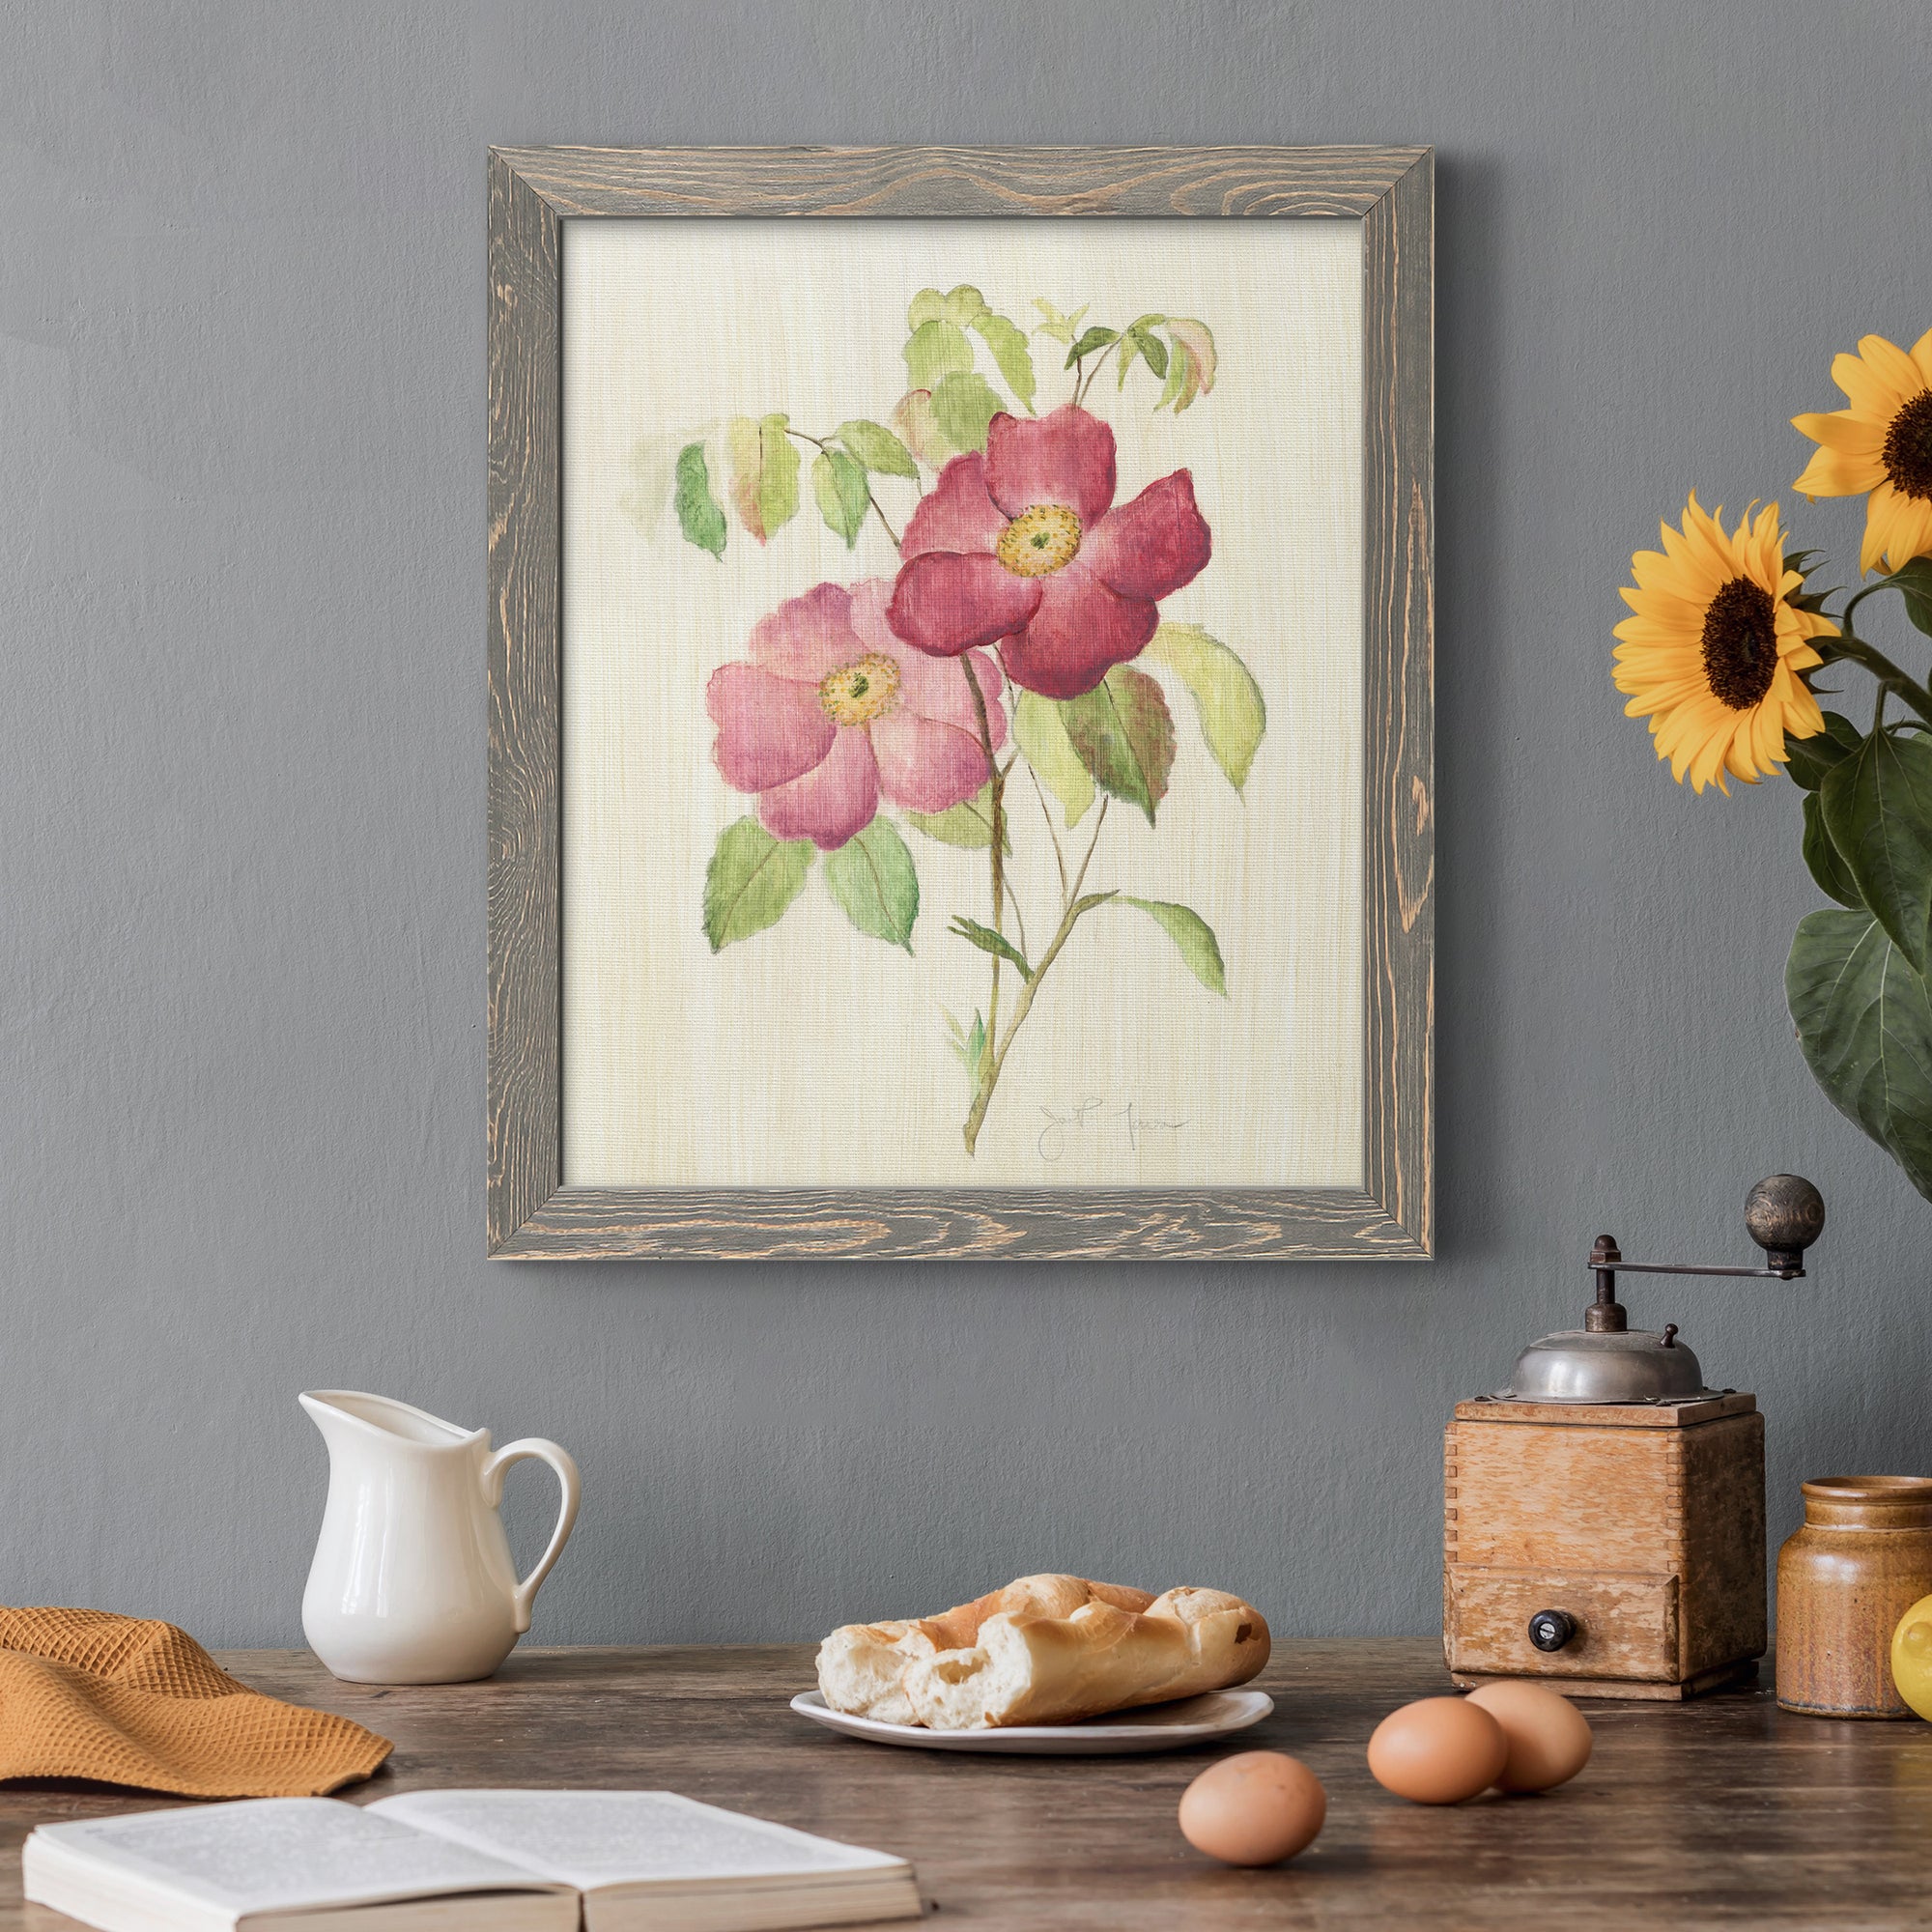 Dusty Rose II - Premium Canvas Framed in Barnwood - Ready to Hang